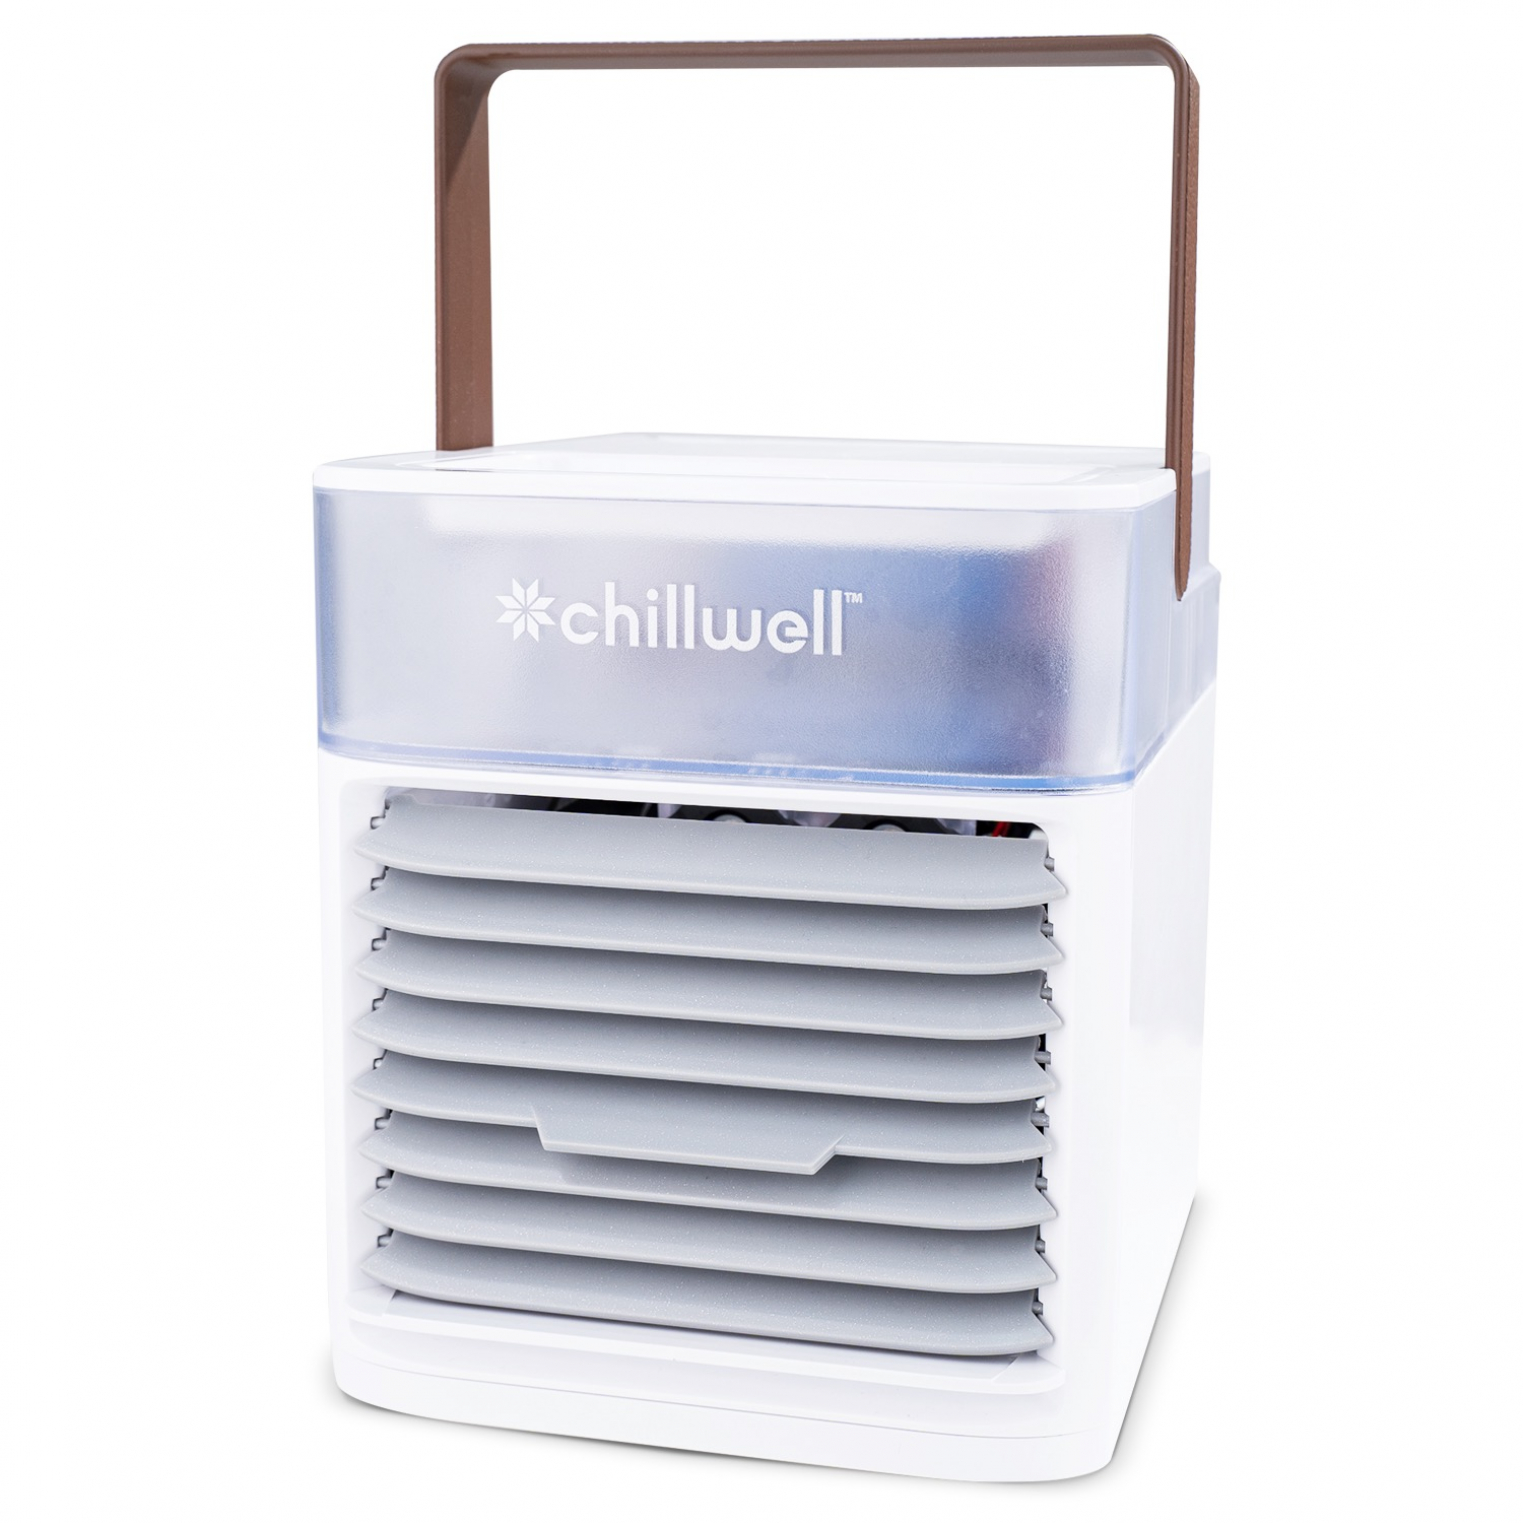 Chillwell AC Chill Cooler